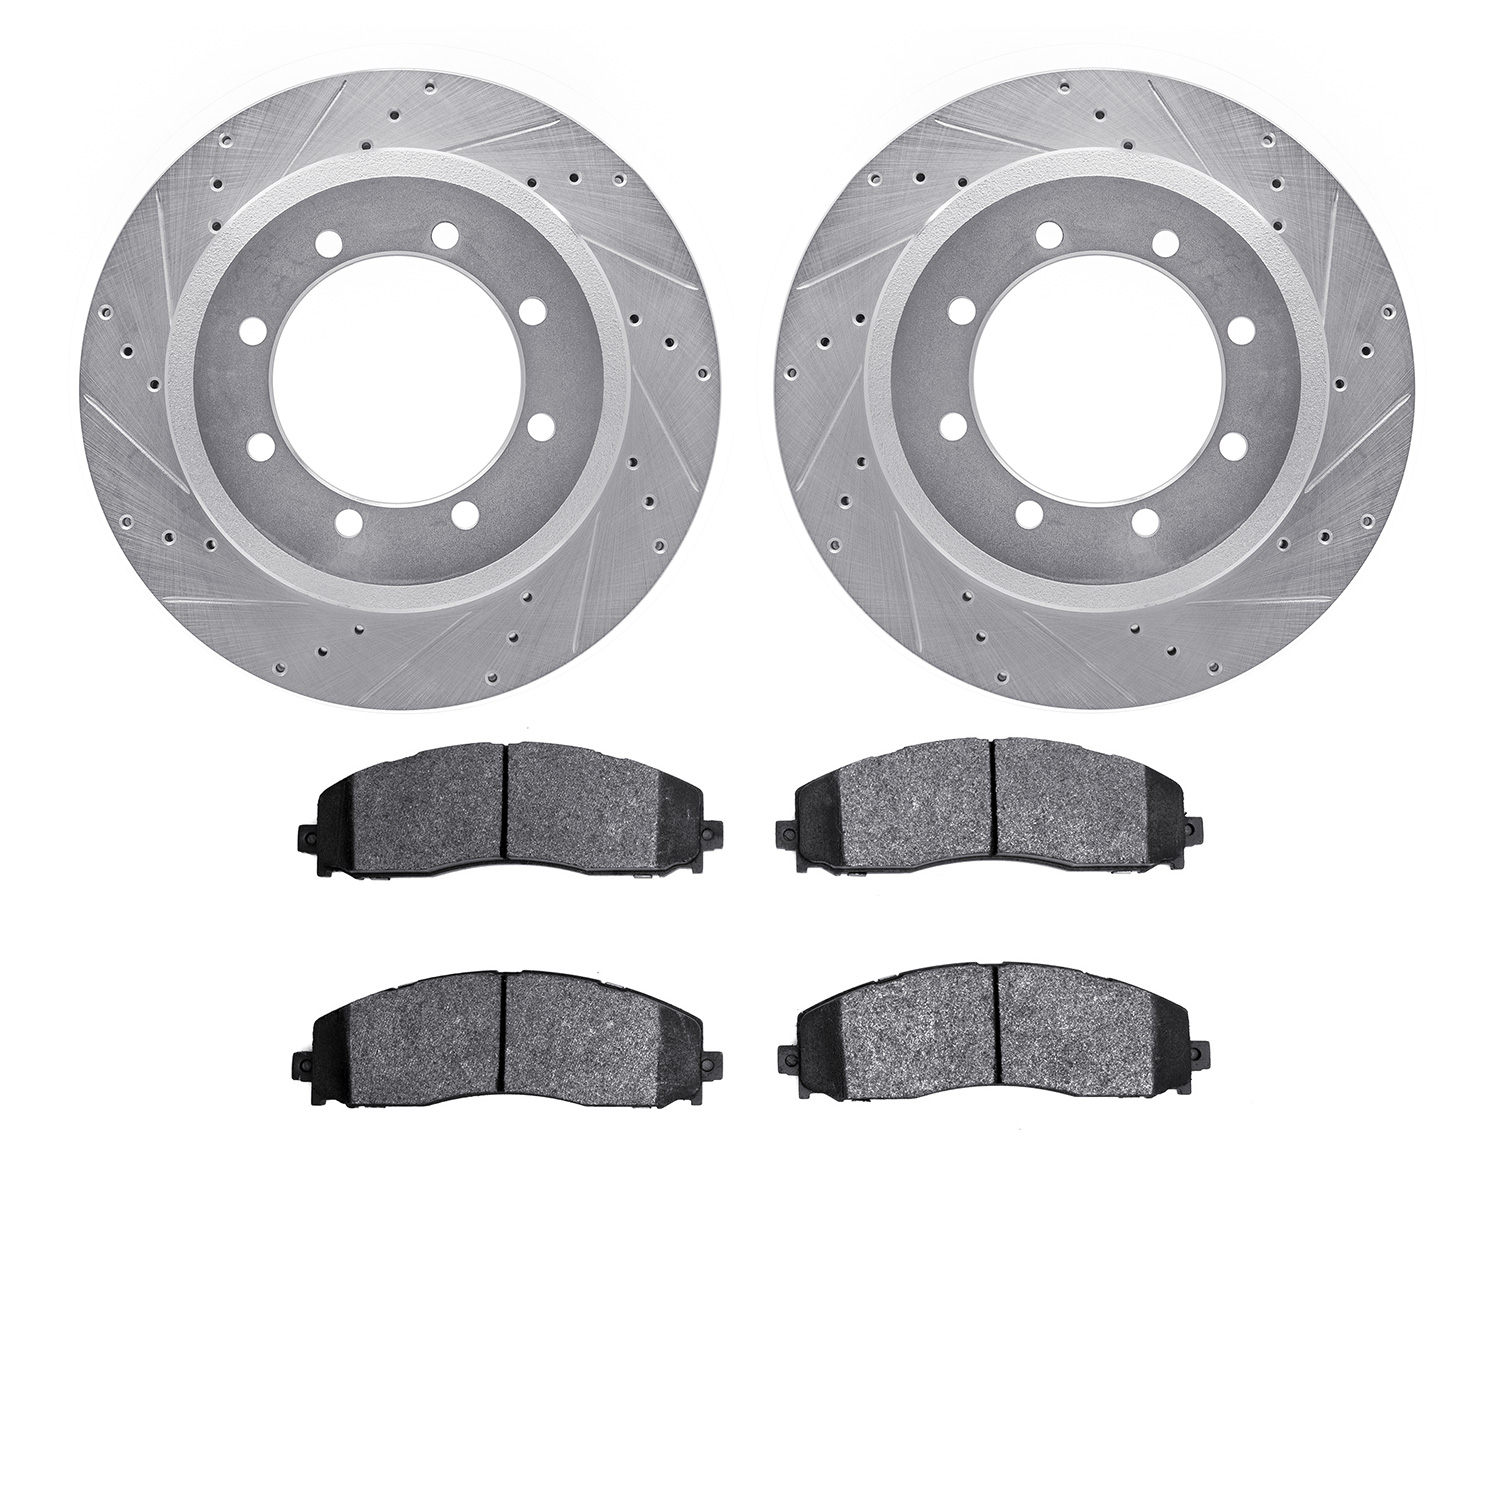 7502-99681 Drilled/Slotted Brake Rotors w/5000 Advanced Brake Pads Kit [Silver], Fits Select Ford/Lincoln/Mercury/Mazda, Positio